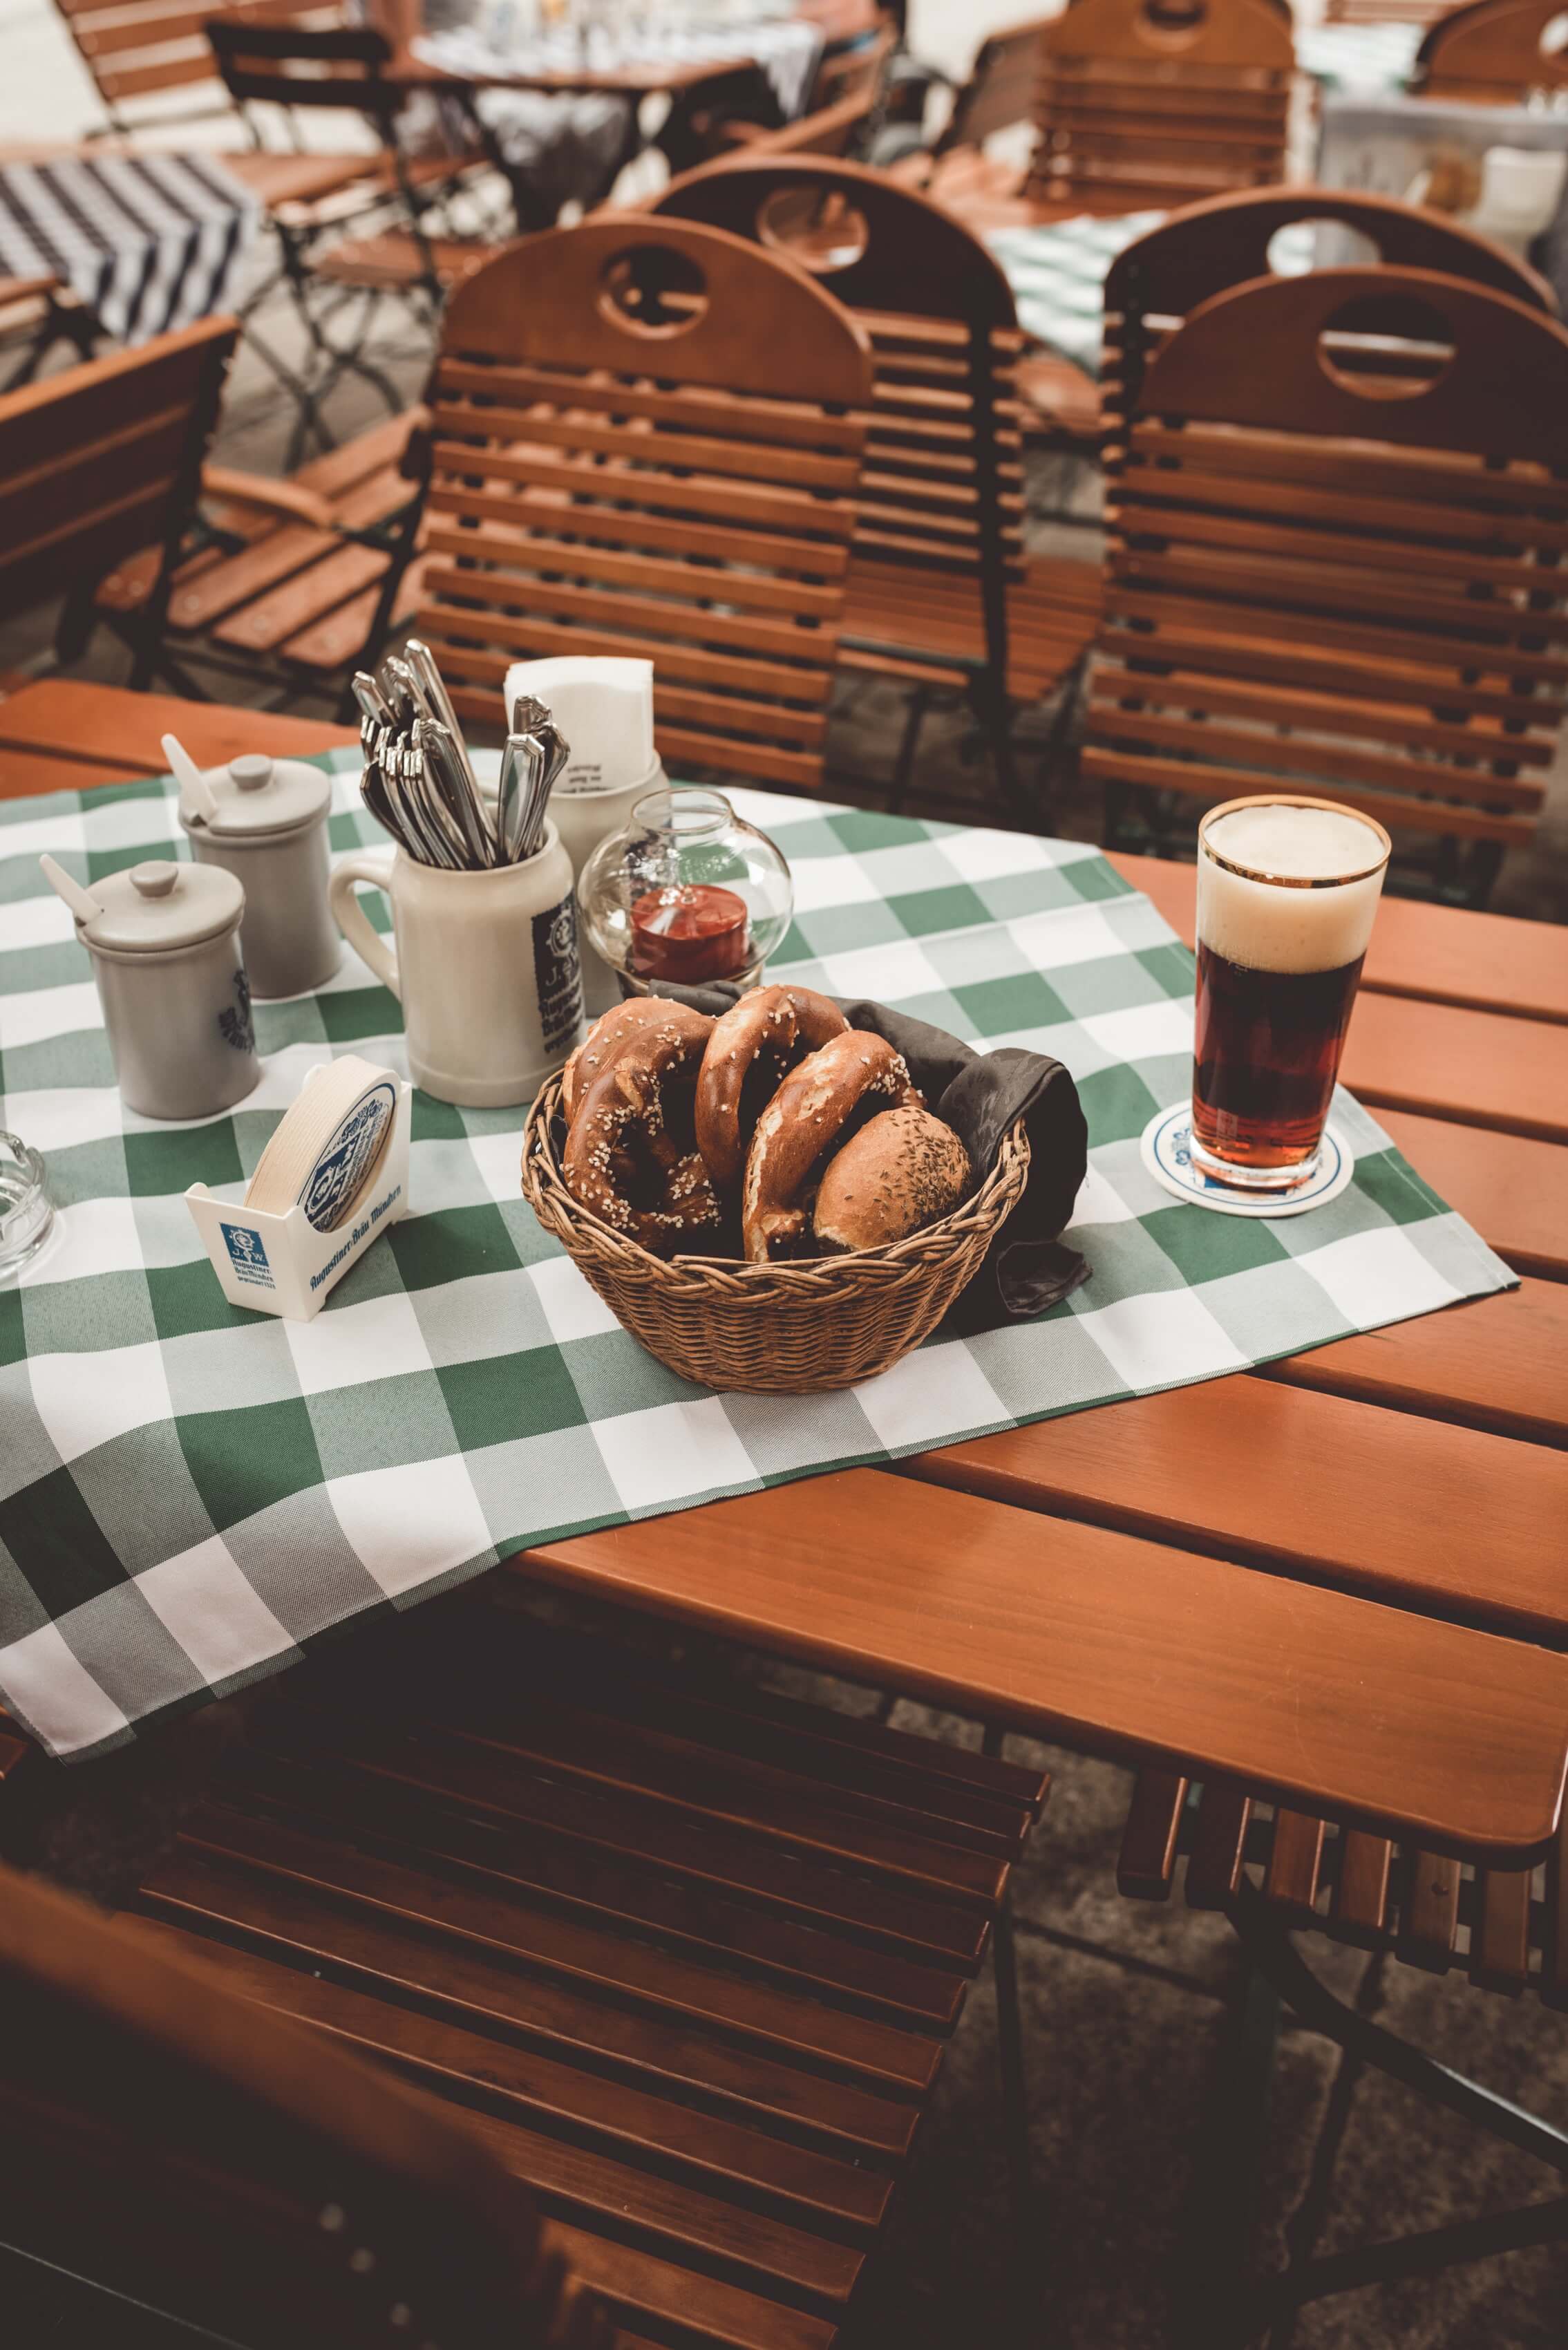 Tables and chairs in a beer garden. On a green and white chequered tablecloth are a basket of pretzels, a glass of beer and cutlery